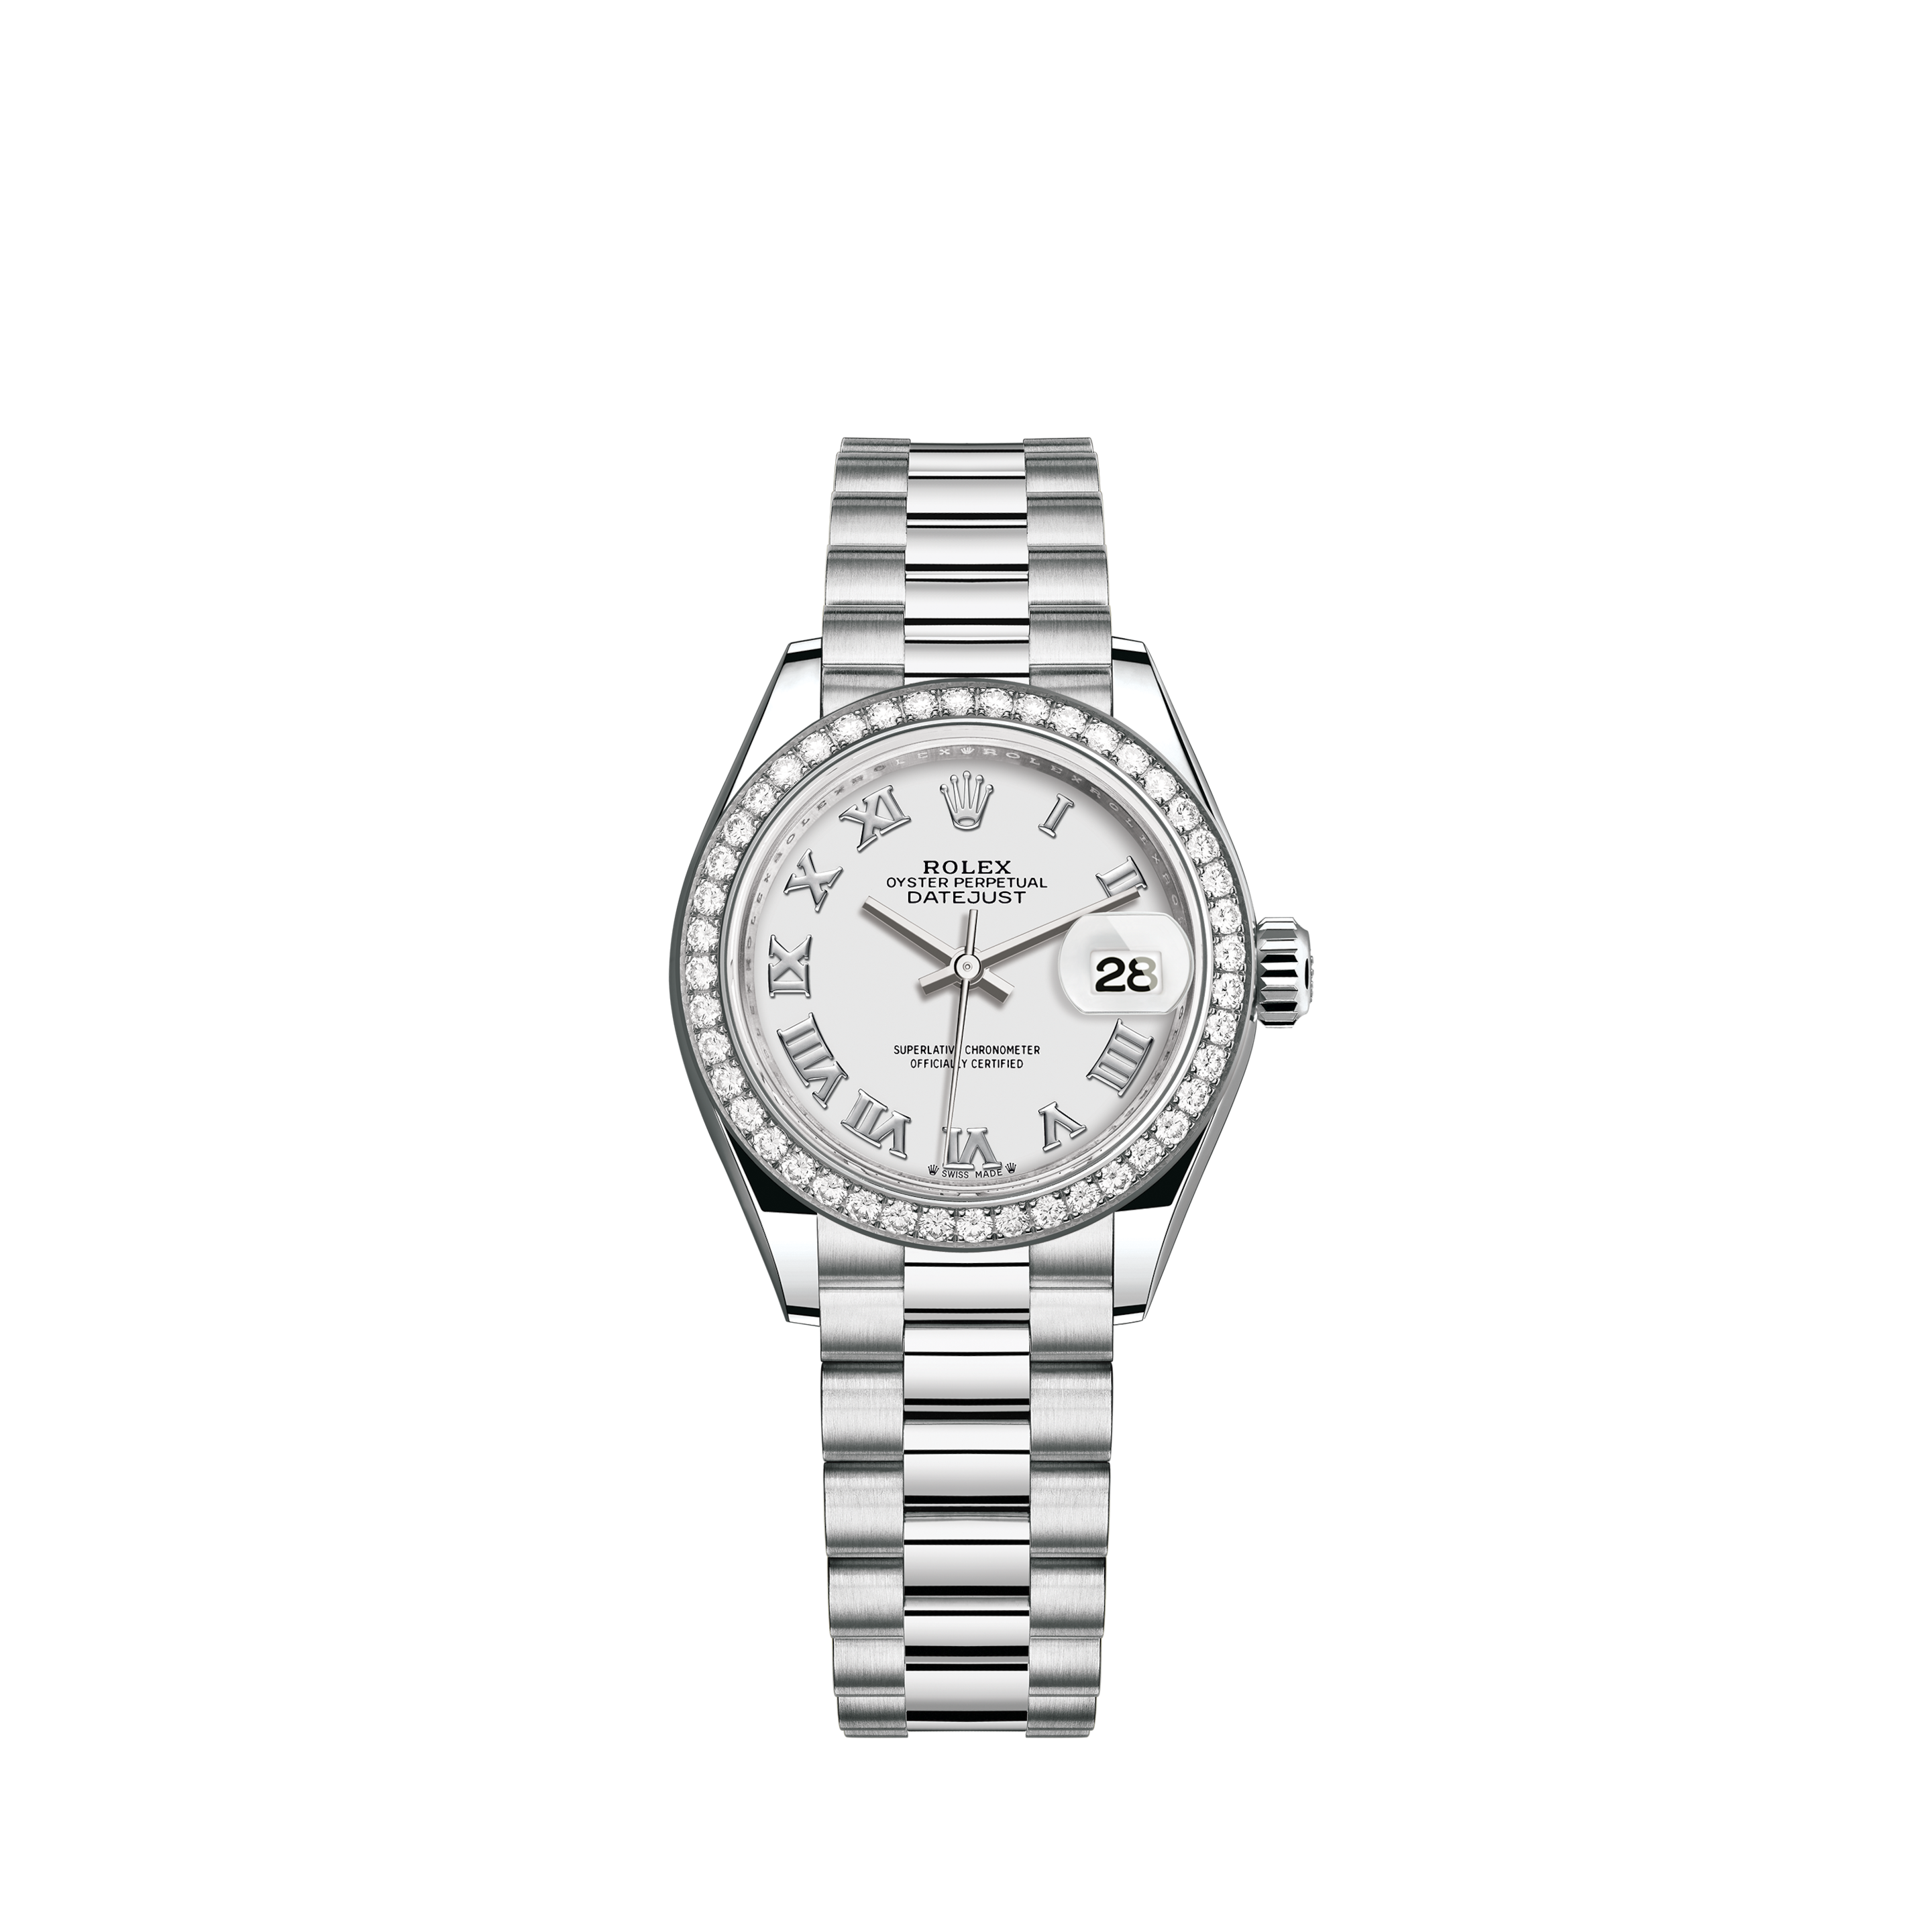 Rolex 36mm Datejust White Mother Of Pearl Dial with Baguette 6&9 Emerald & Diamond Bezel Automatic Watch